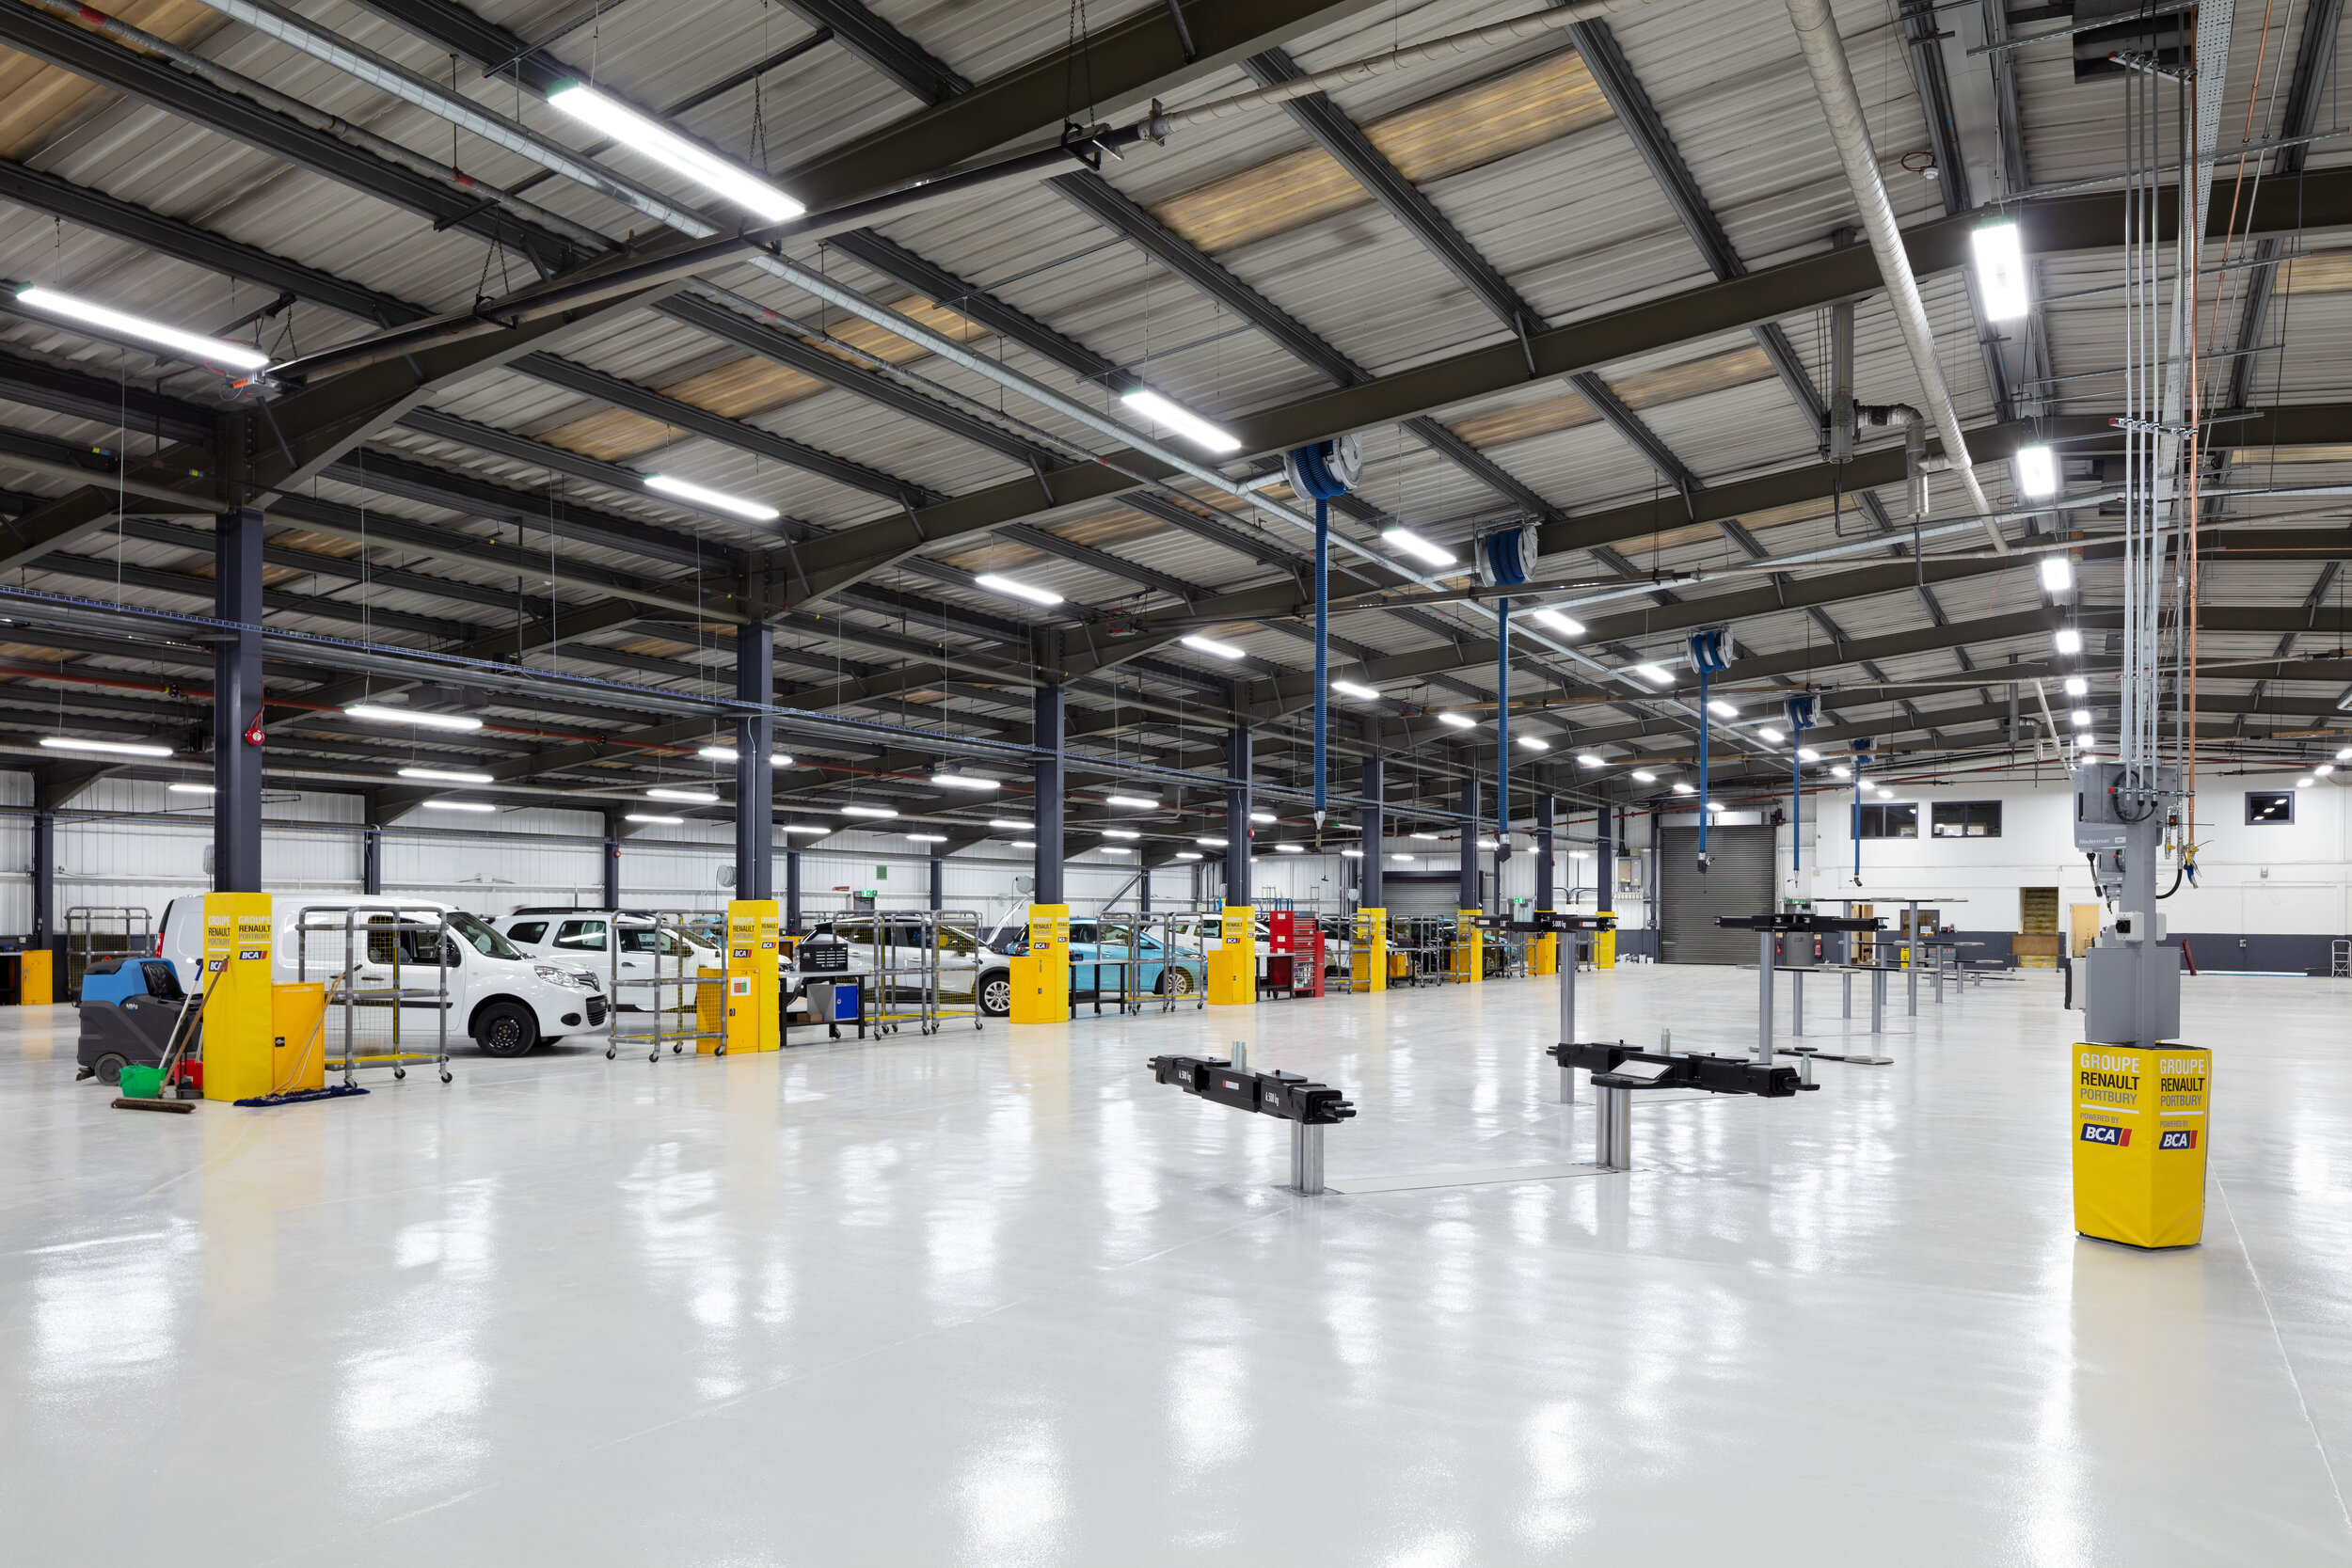  BAC Vehicle Services have recently opened their newly refurbished Renault Import Centre in Portbury. The new facility was designed by Hadfield Cawkwell Davidson with the refurbishment works done by Wordsworth Construction Services. Client: BCA Vehic